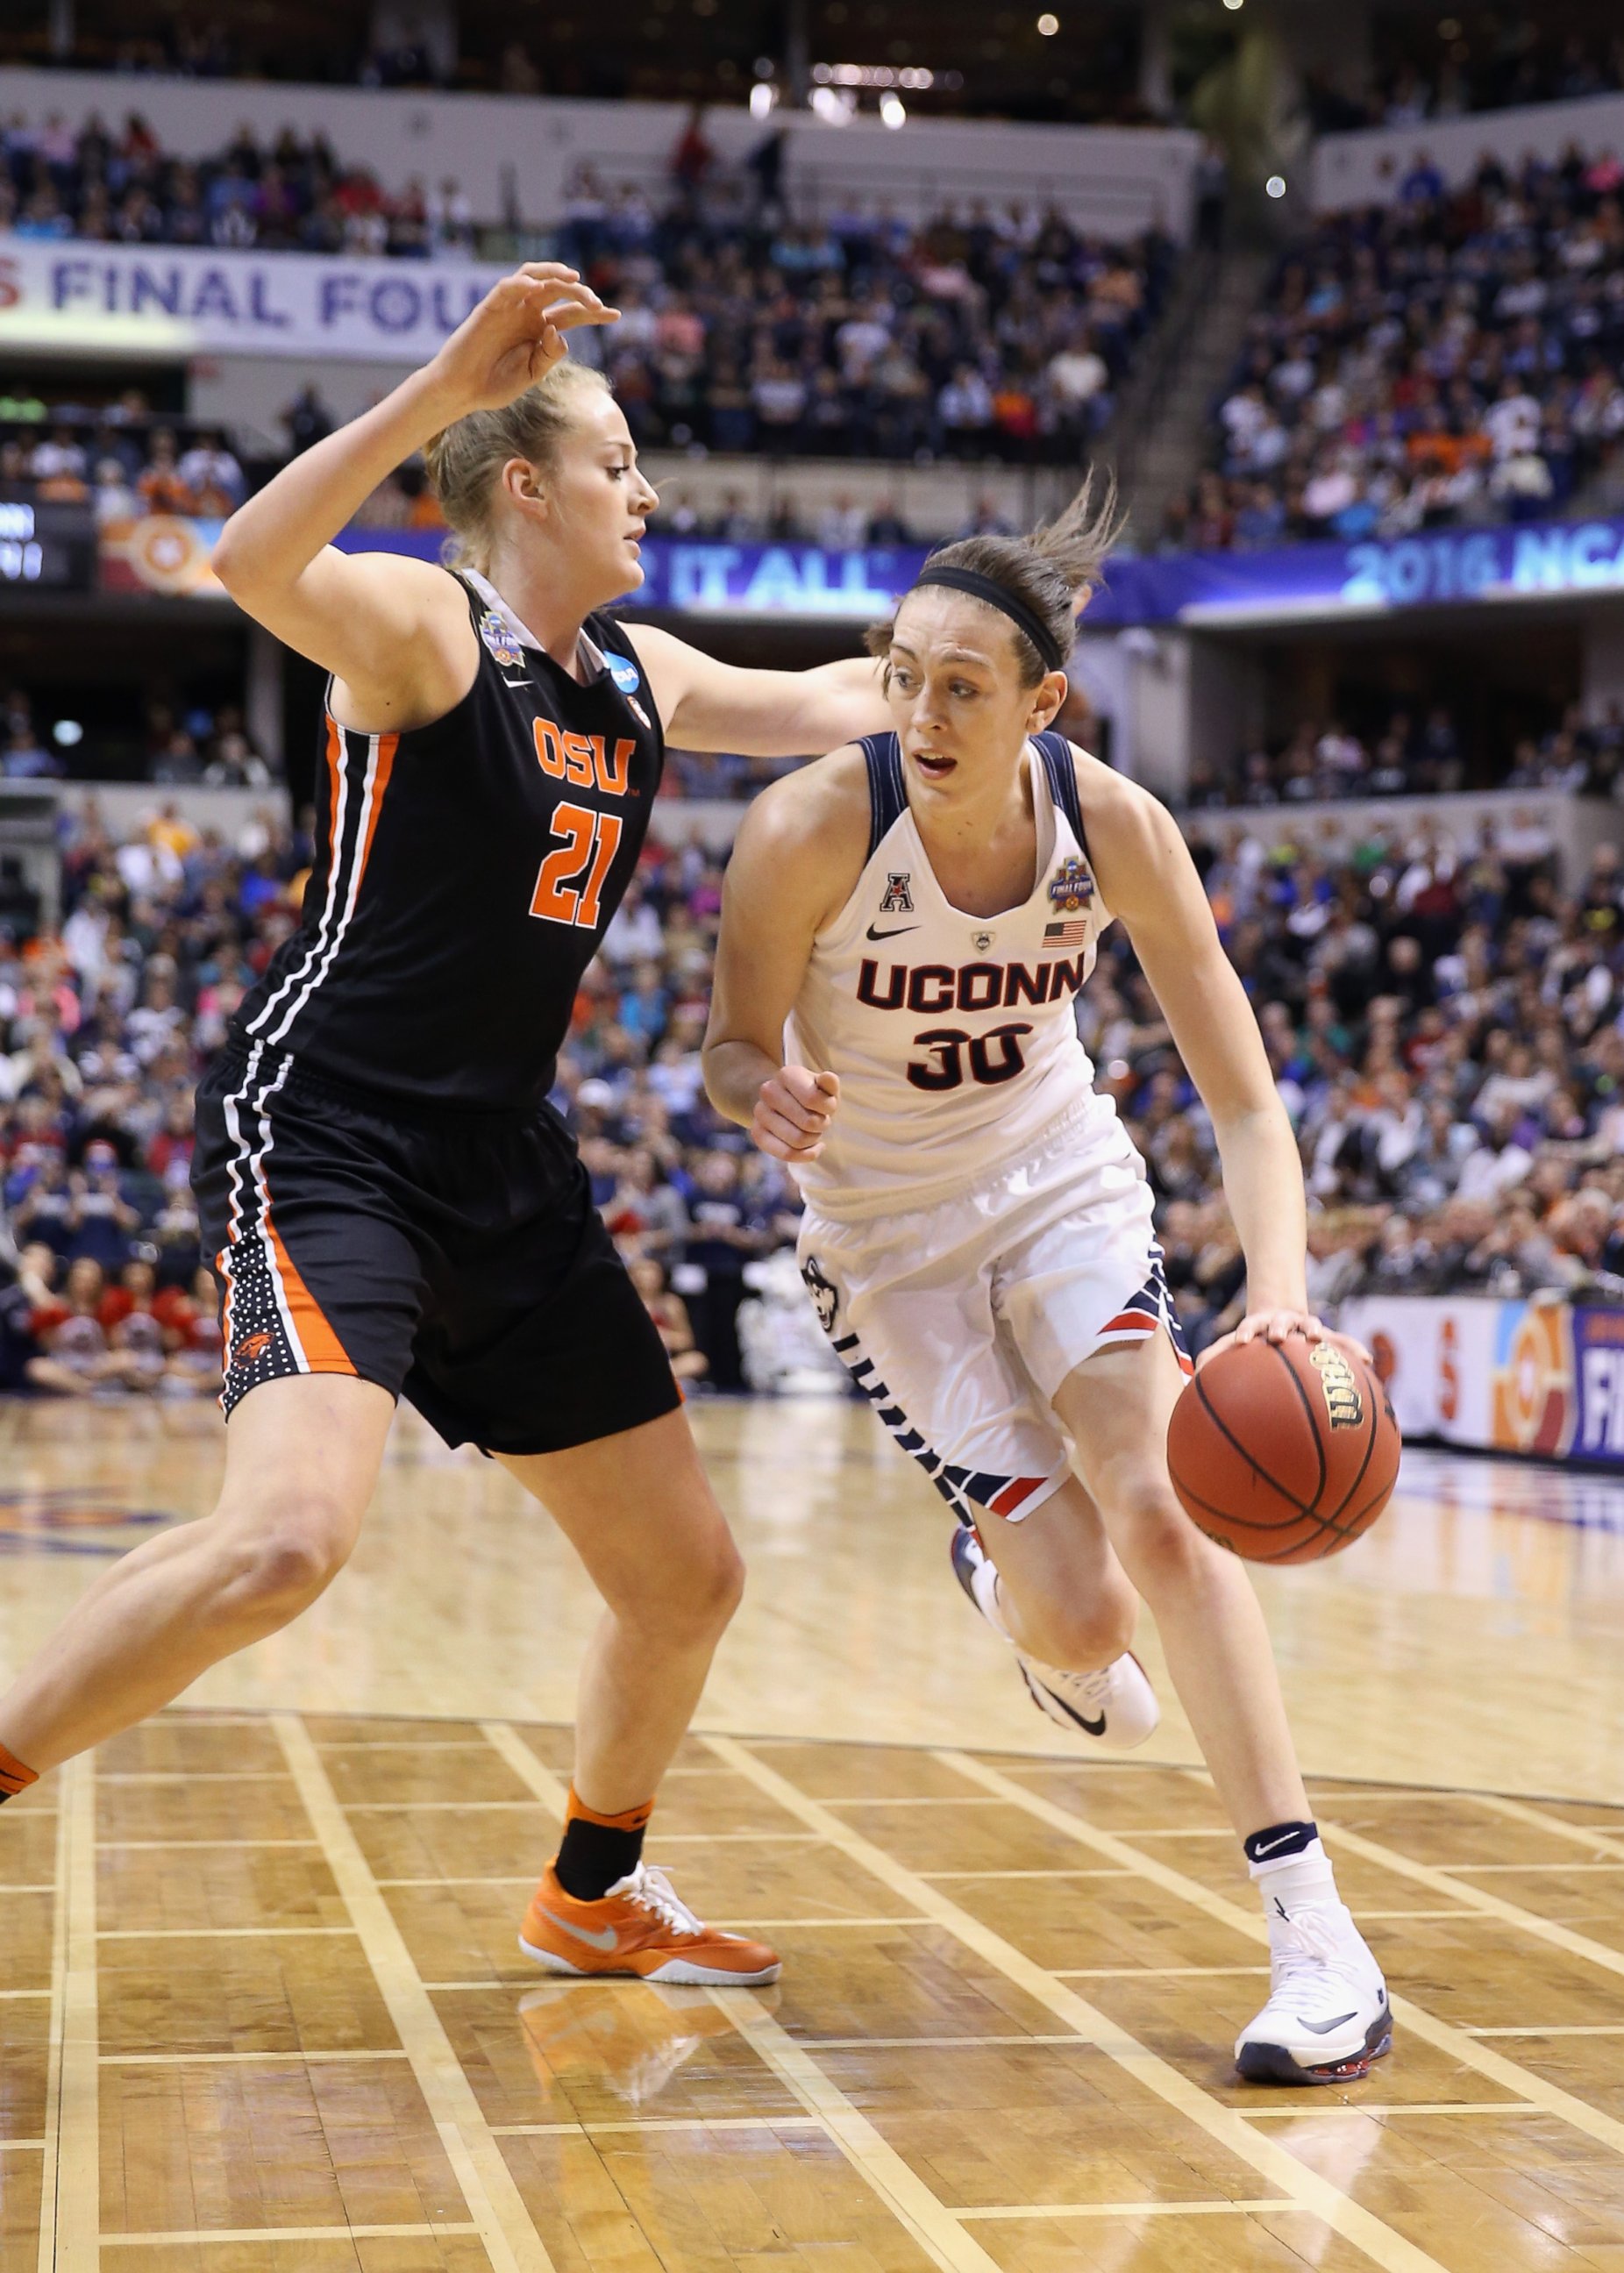 PHOTO: Breanna Stewart (30) of the Connecticut Huskies drives against Marie Gulich (21) of the Oregon State Beavers in the second quarter during the semifinals of the 2016 NCAA Women's Final Four Basketball Championship on April 3, 2016 in Indianapolis.